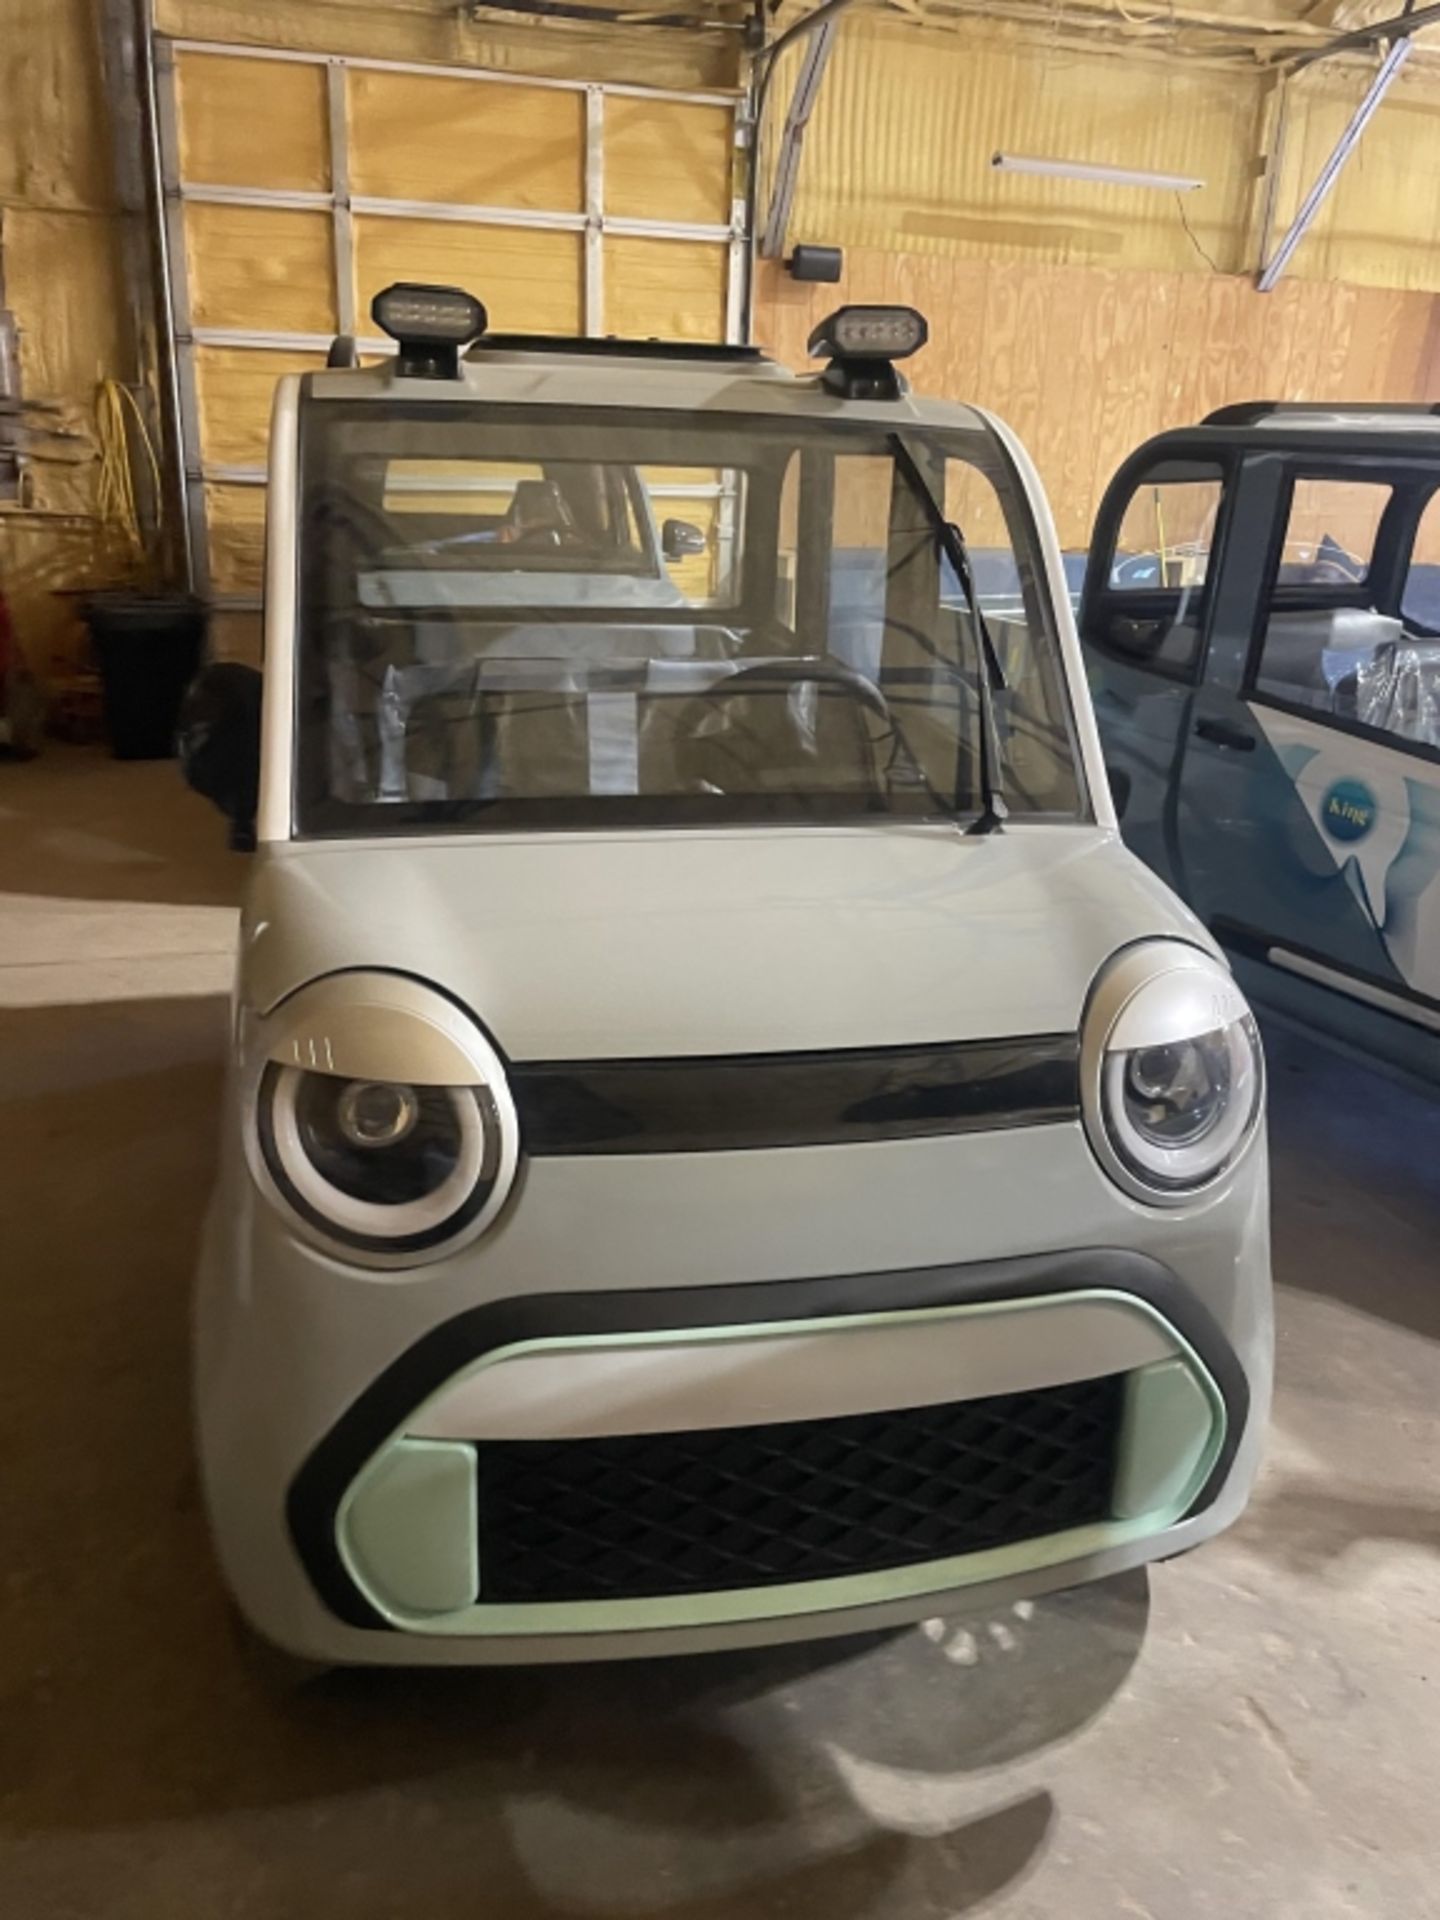 MECO M-F Electric Vehicle - Image 6 of 12